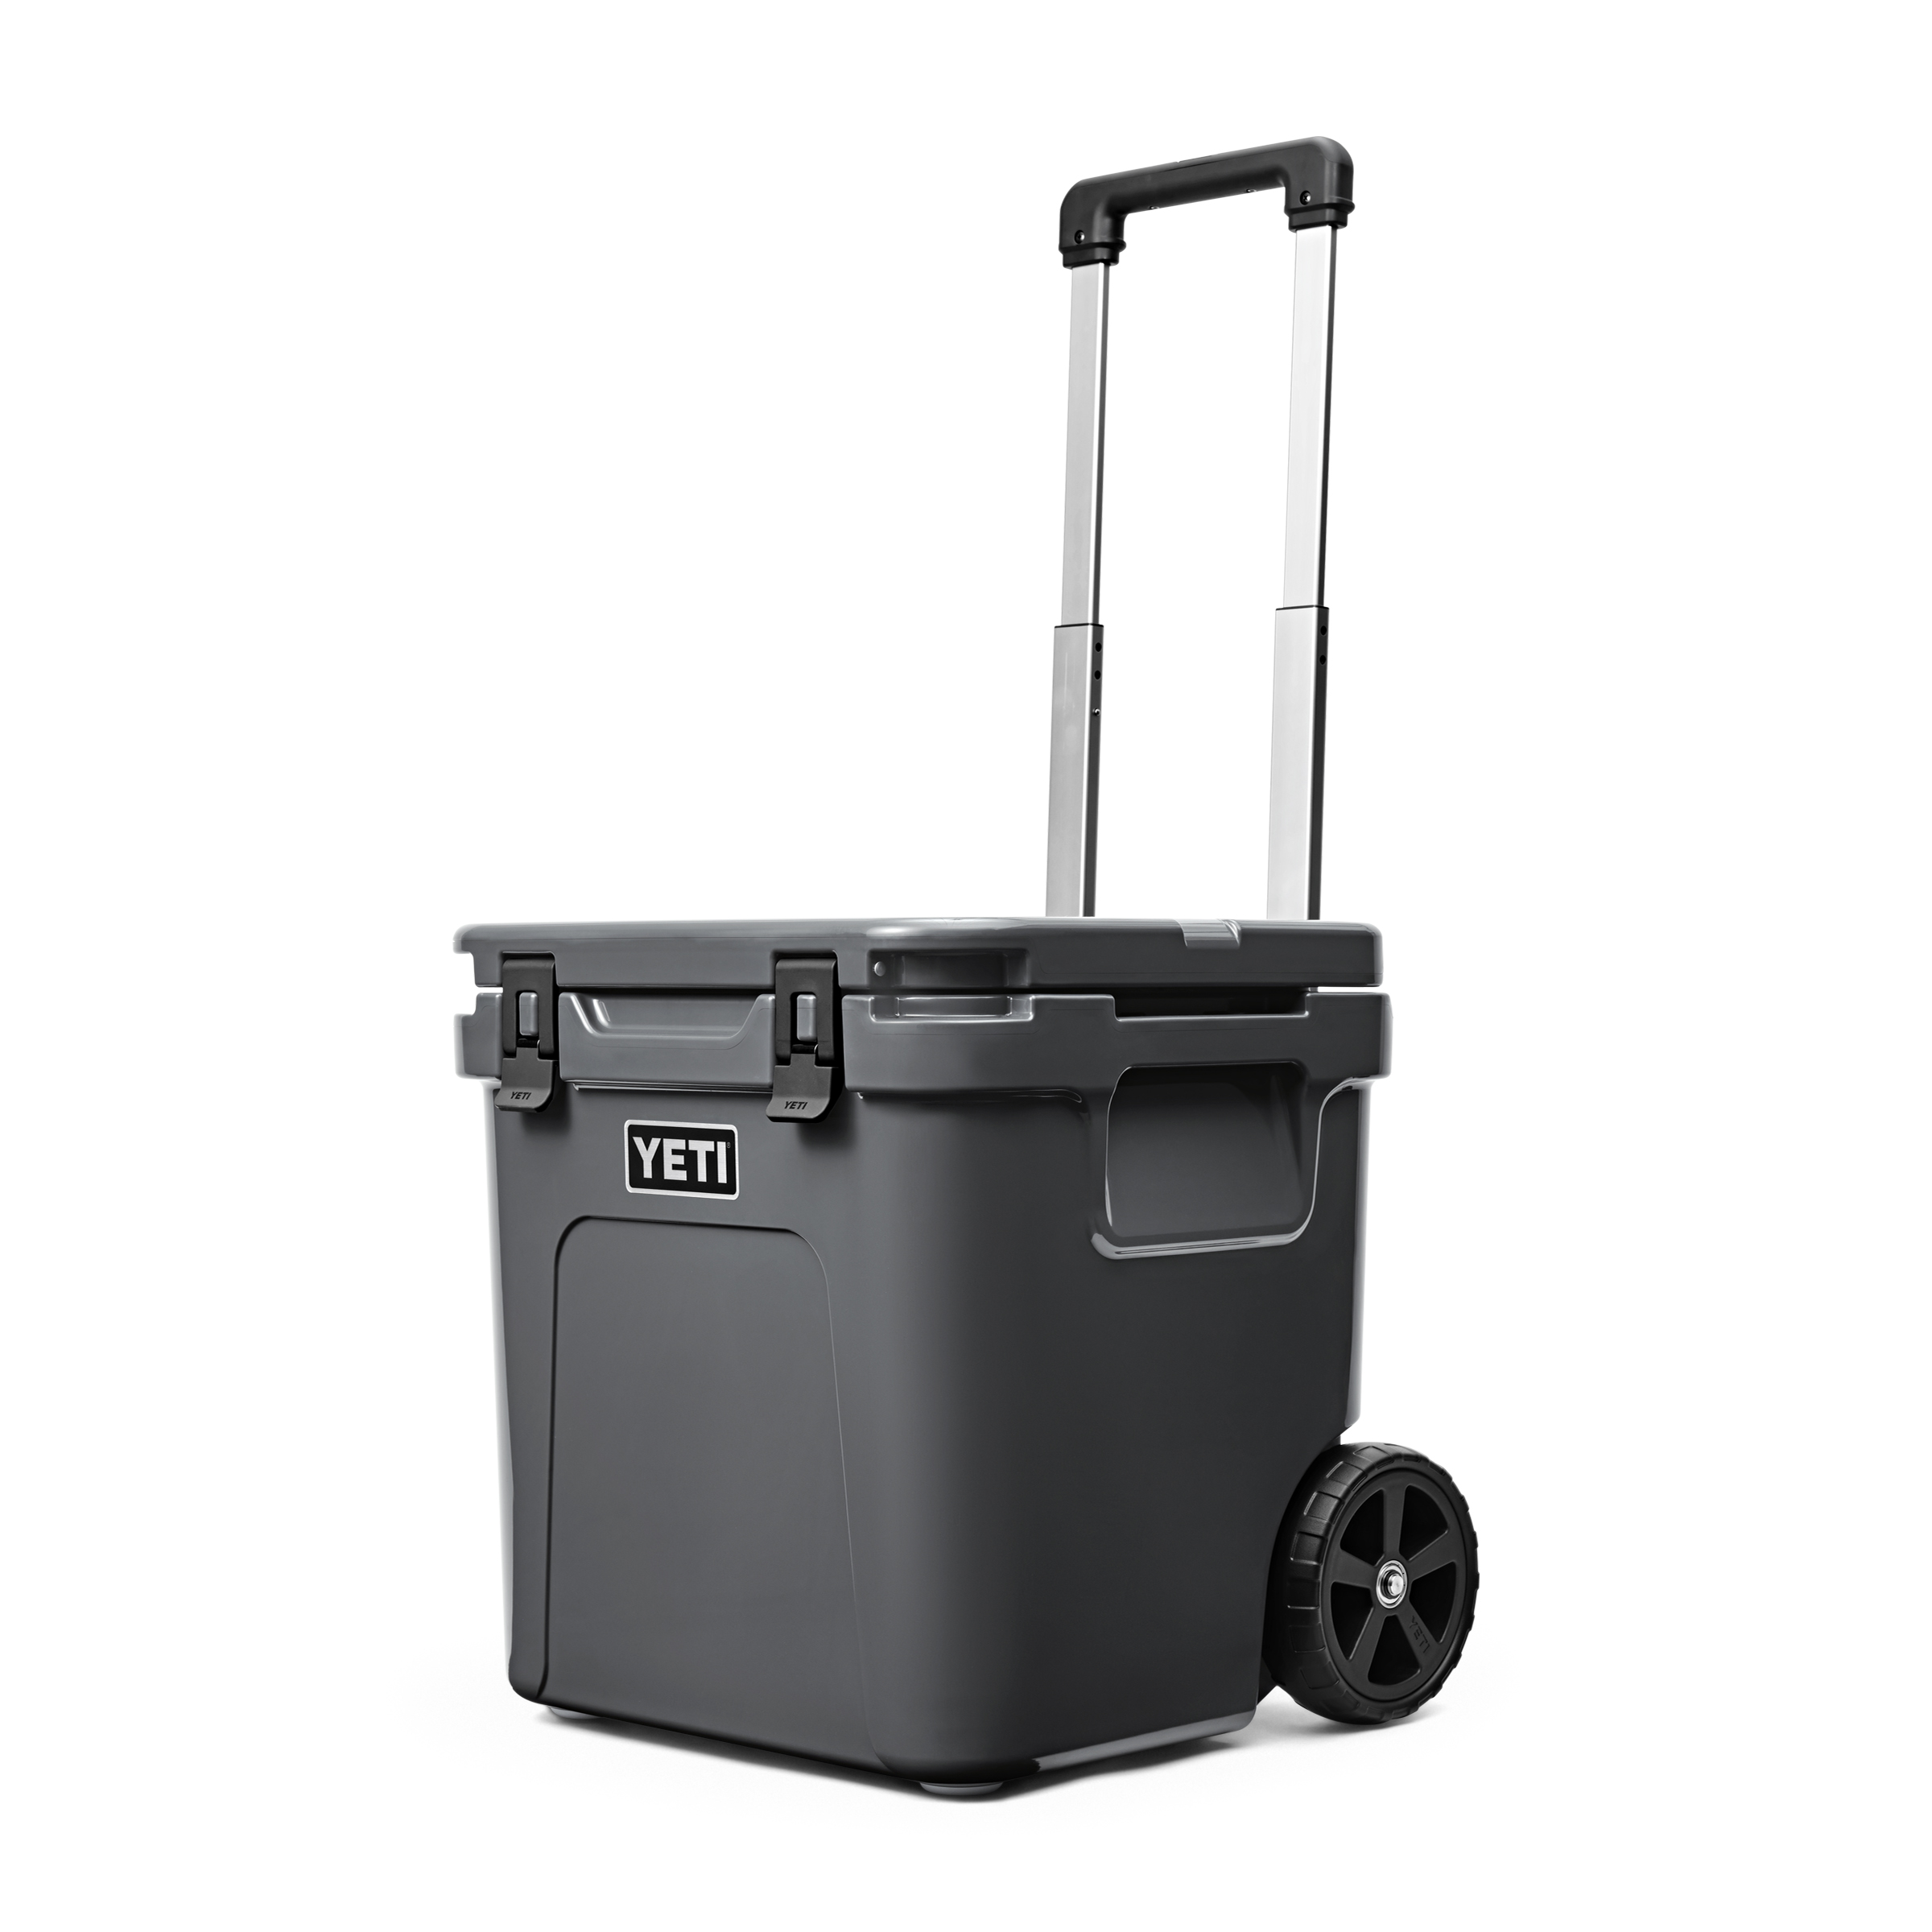 Wholesale_Hard_Coolers_Roadie_48_Charcoal_3qtr_Closed_Handle_Up_6876_2400x2400